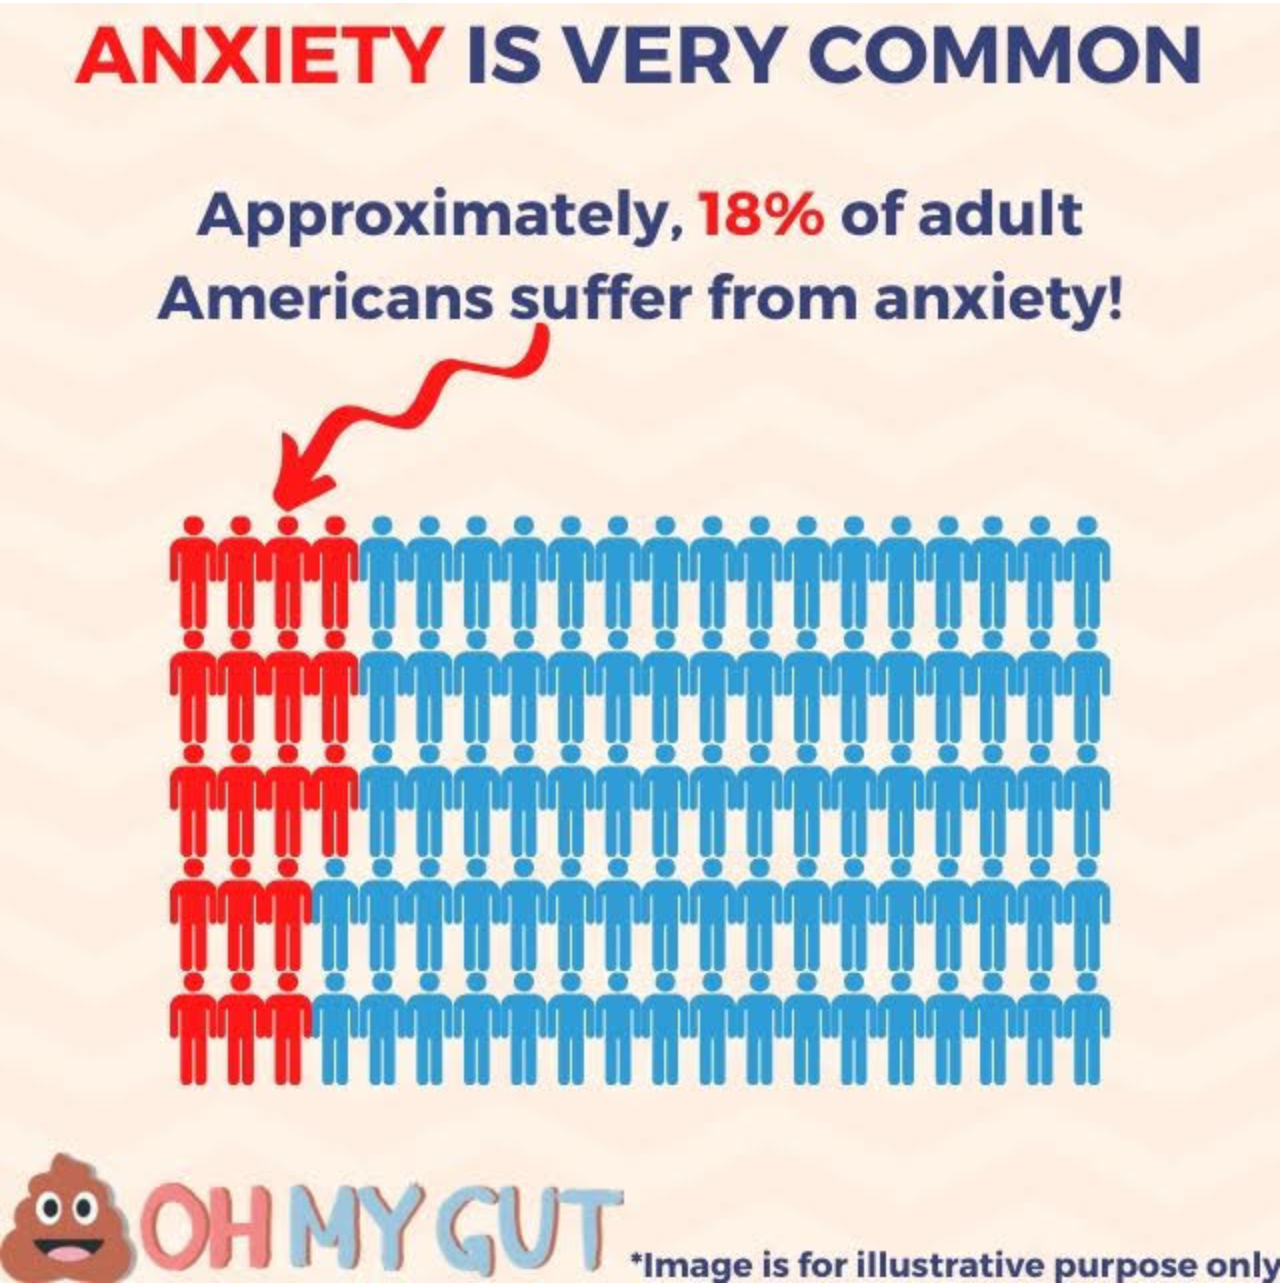 anxiety statistic showing that anxiety is very common among the general population